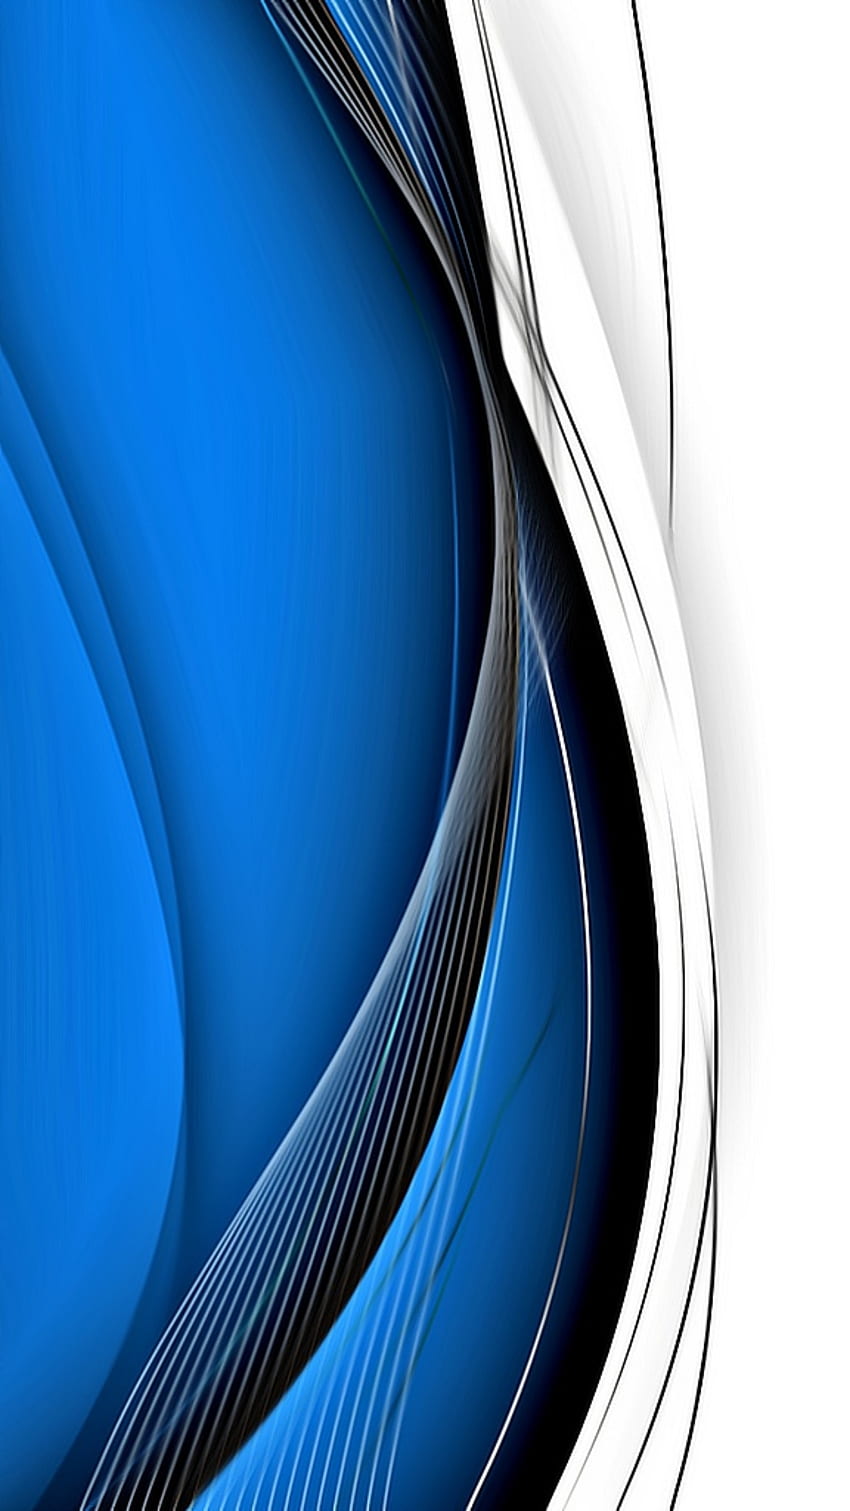 Blue curves waves new, samsung, shapes, geometric, layers, pattern, abstract, galaxy, graphic, smooth HD phone wallpaper